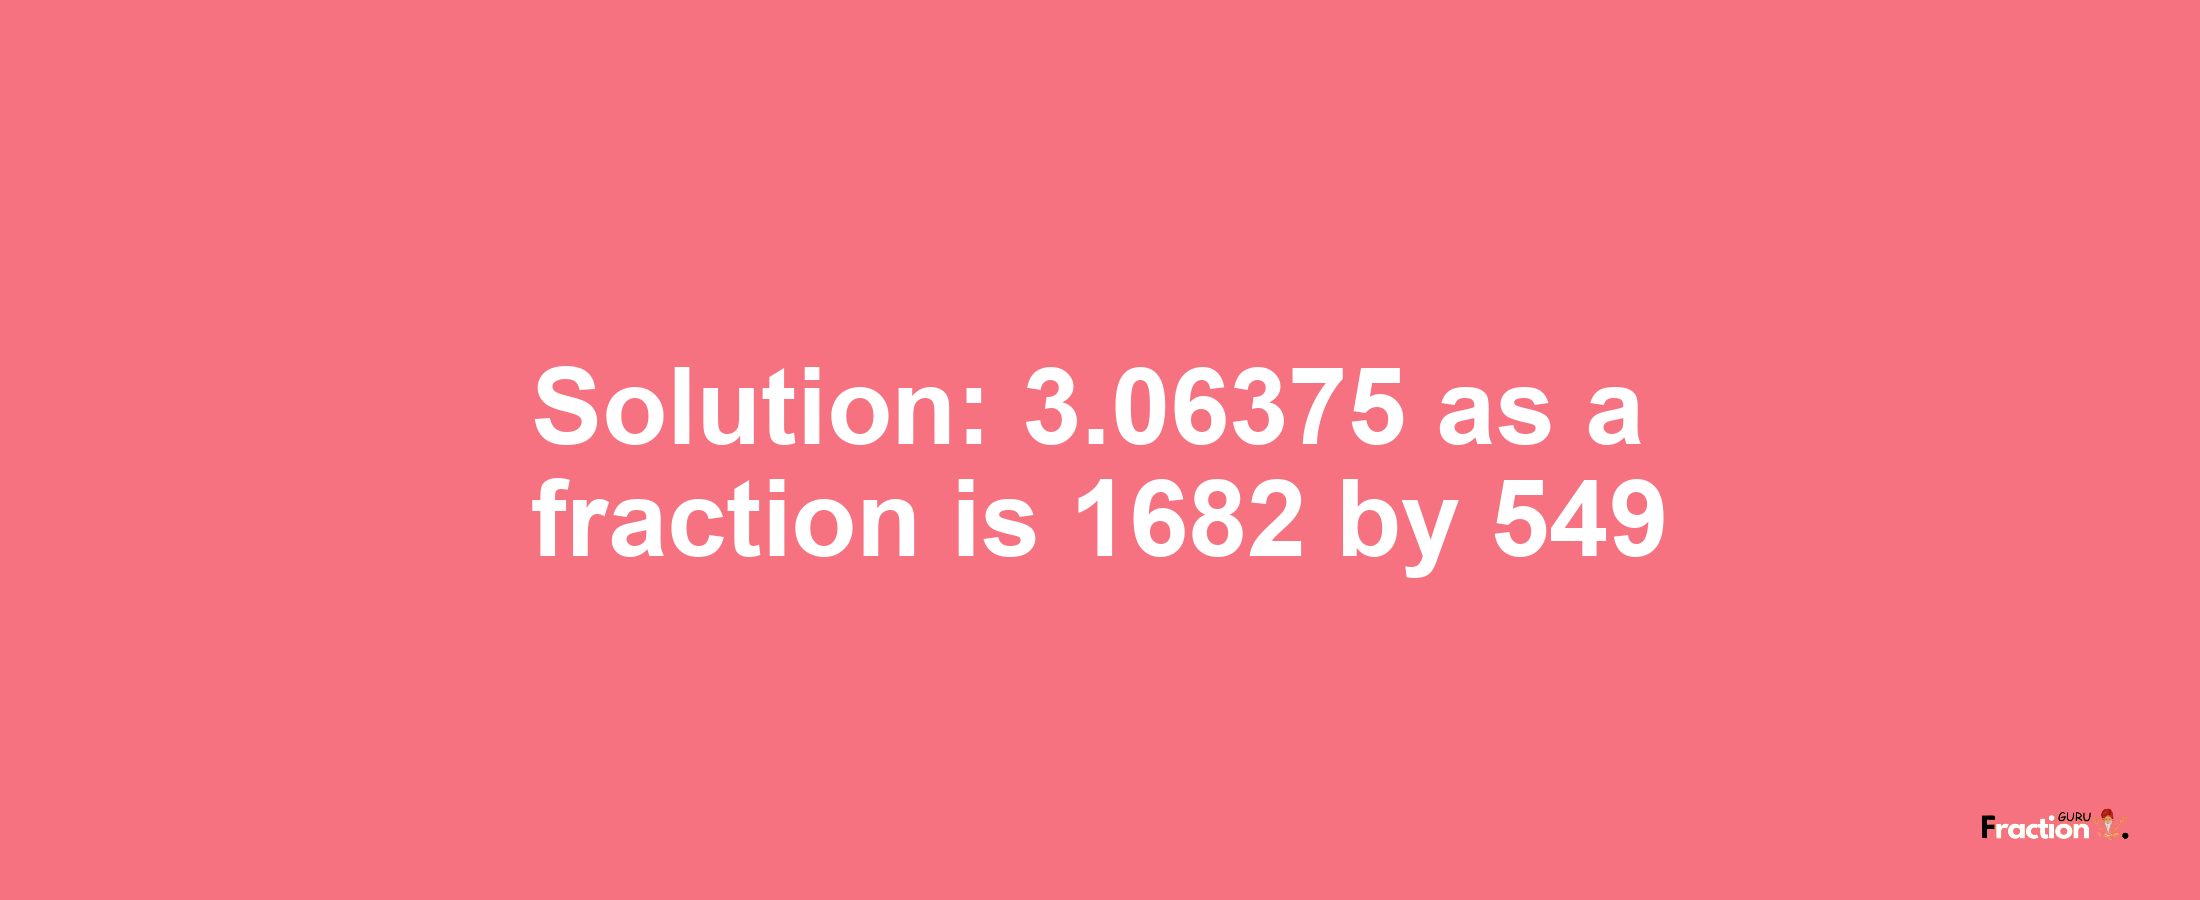 Solution:3.06375 as a fraction is 1682/549